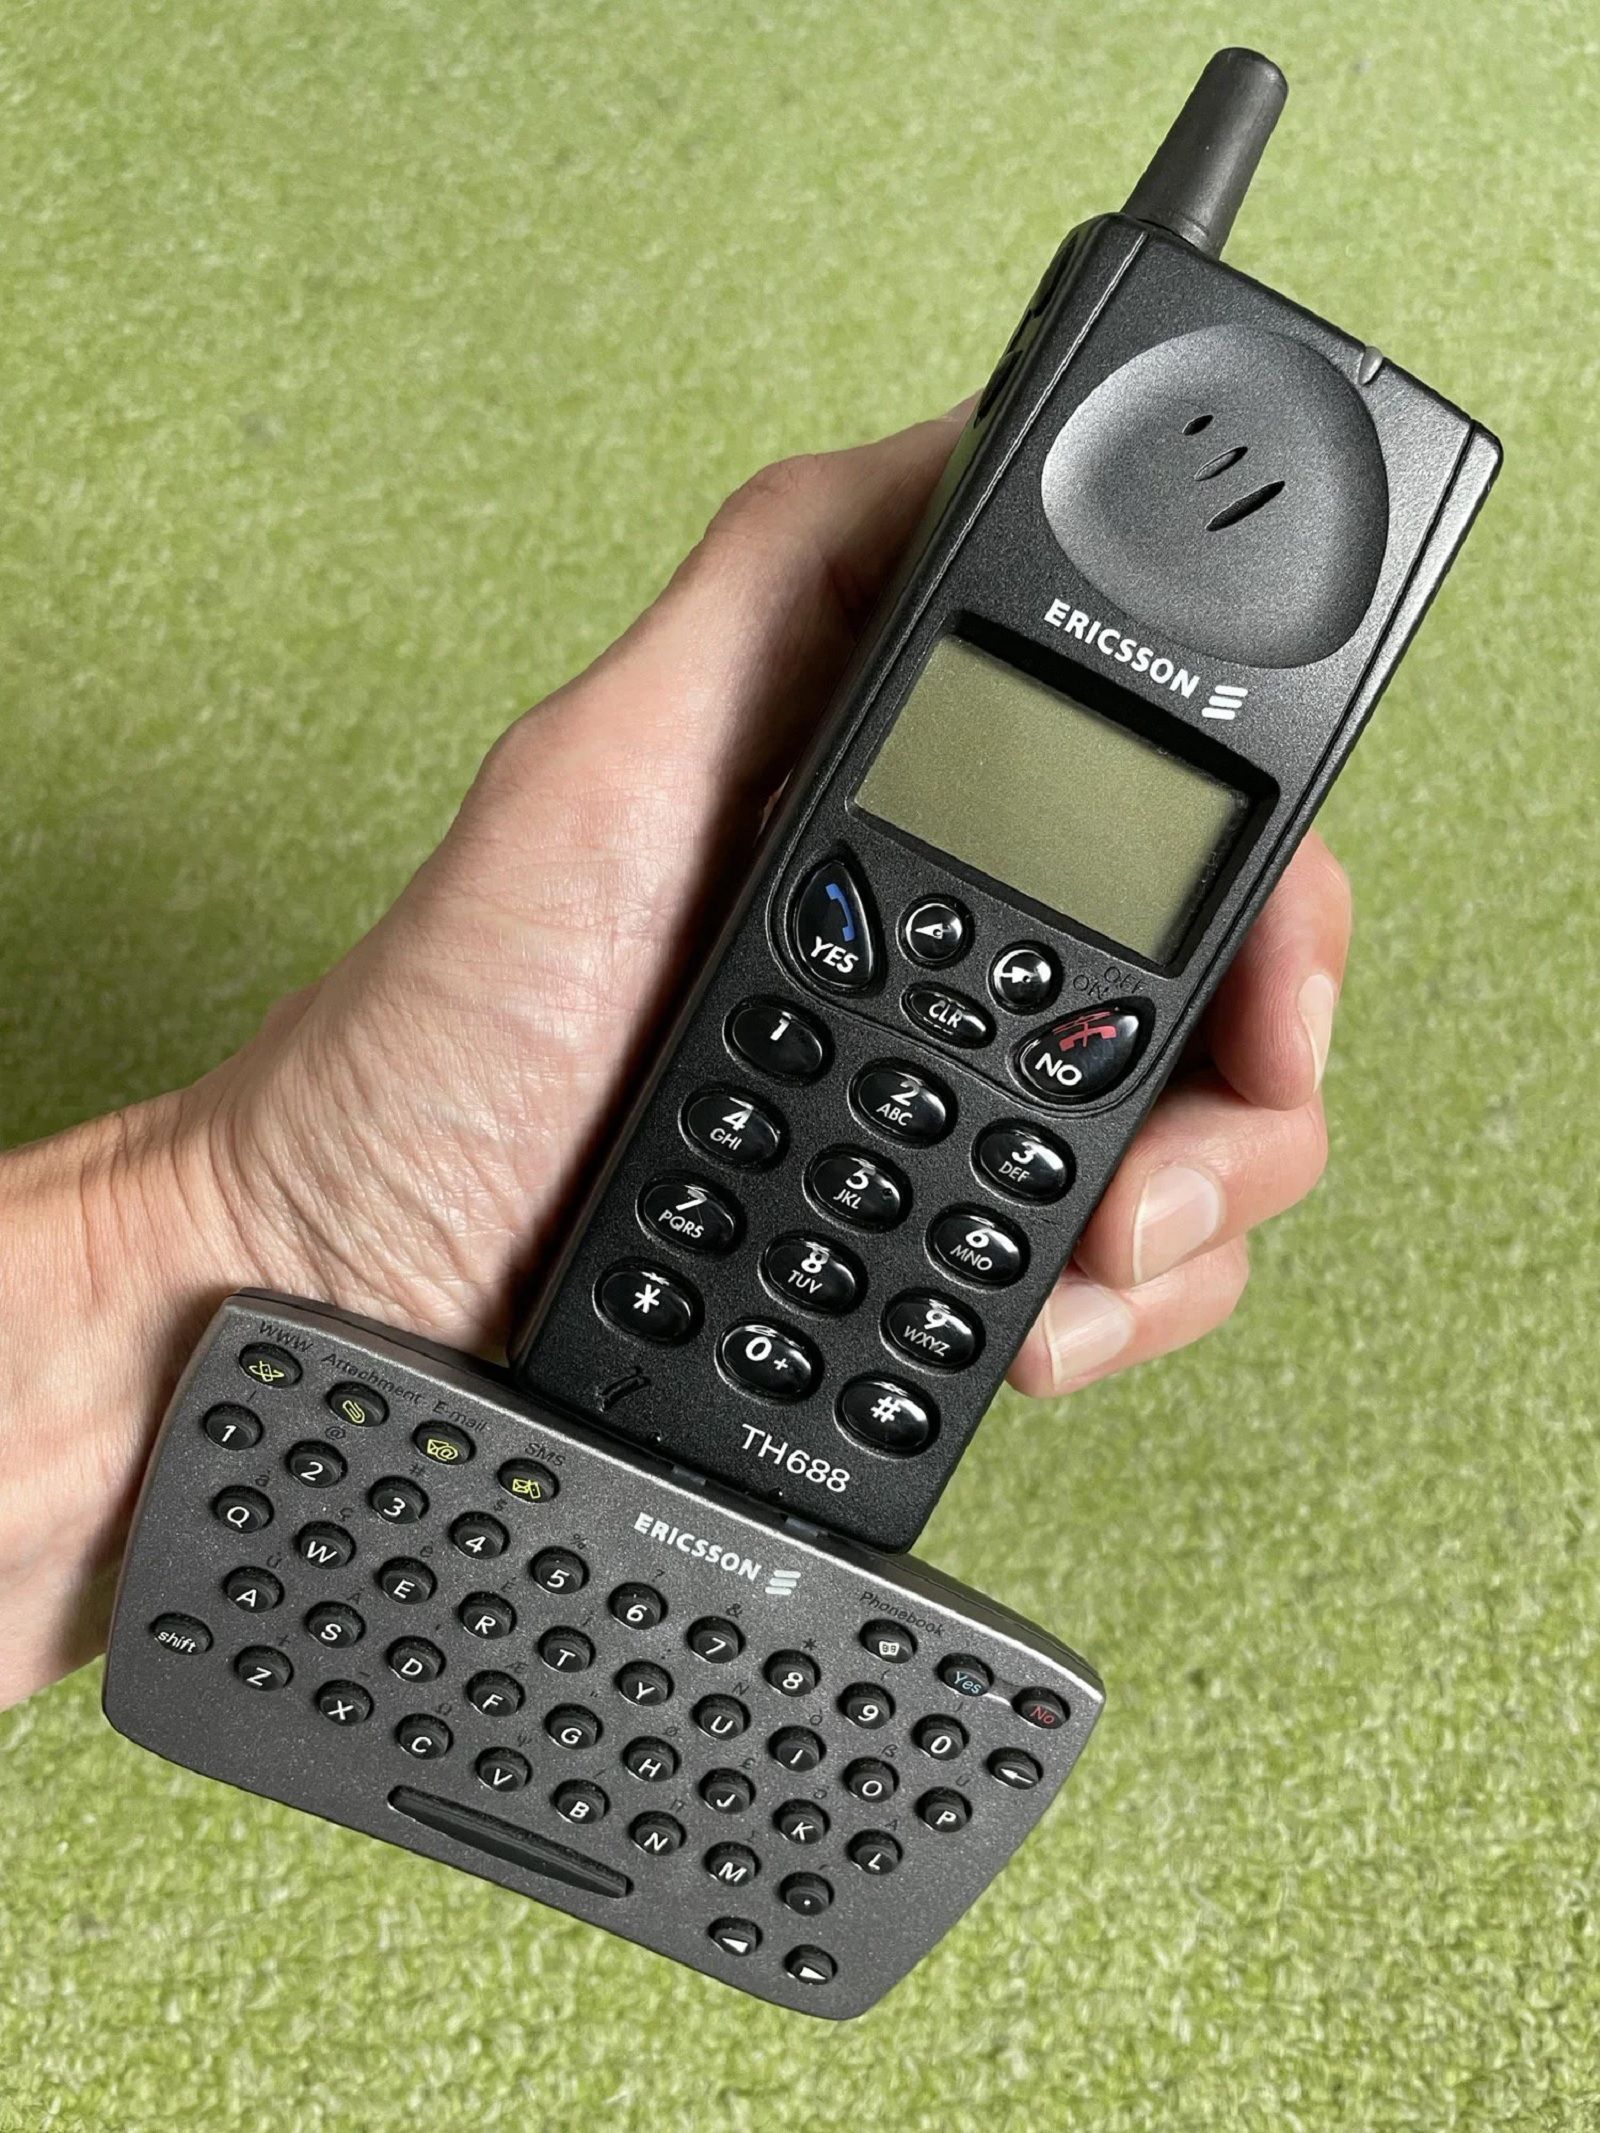 30 of the weirdest and wackiest mobile phones you won t admit you owned photo 32